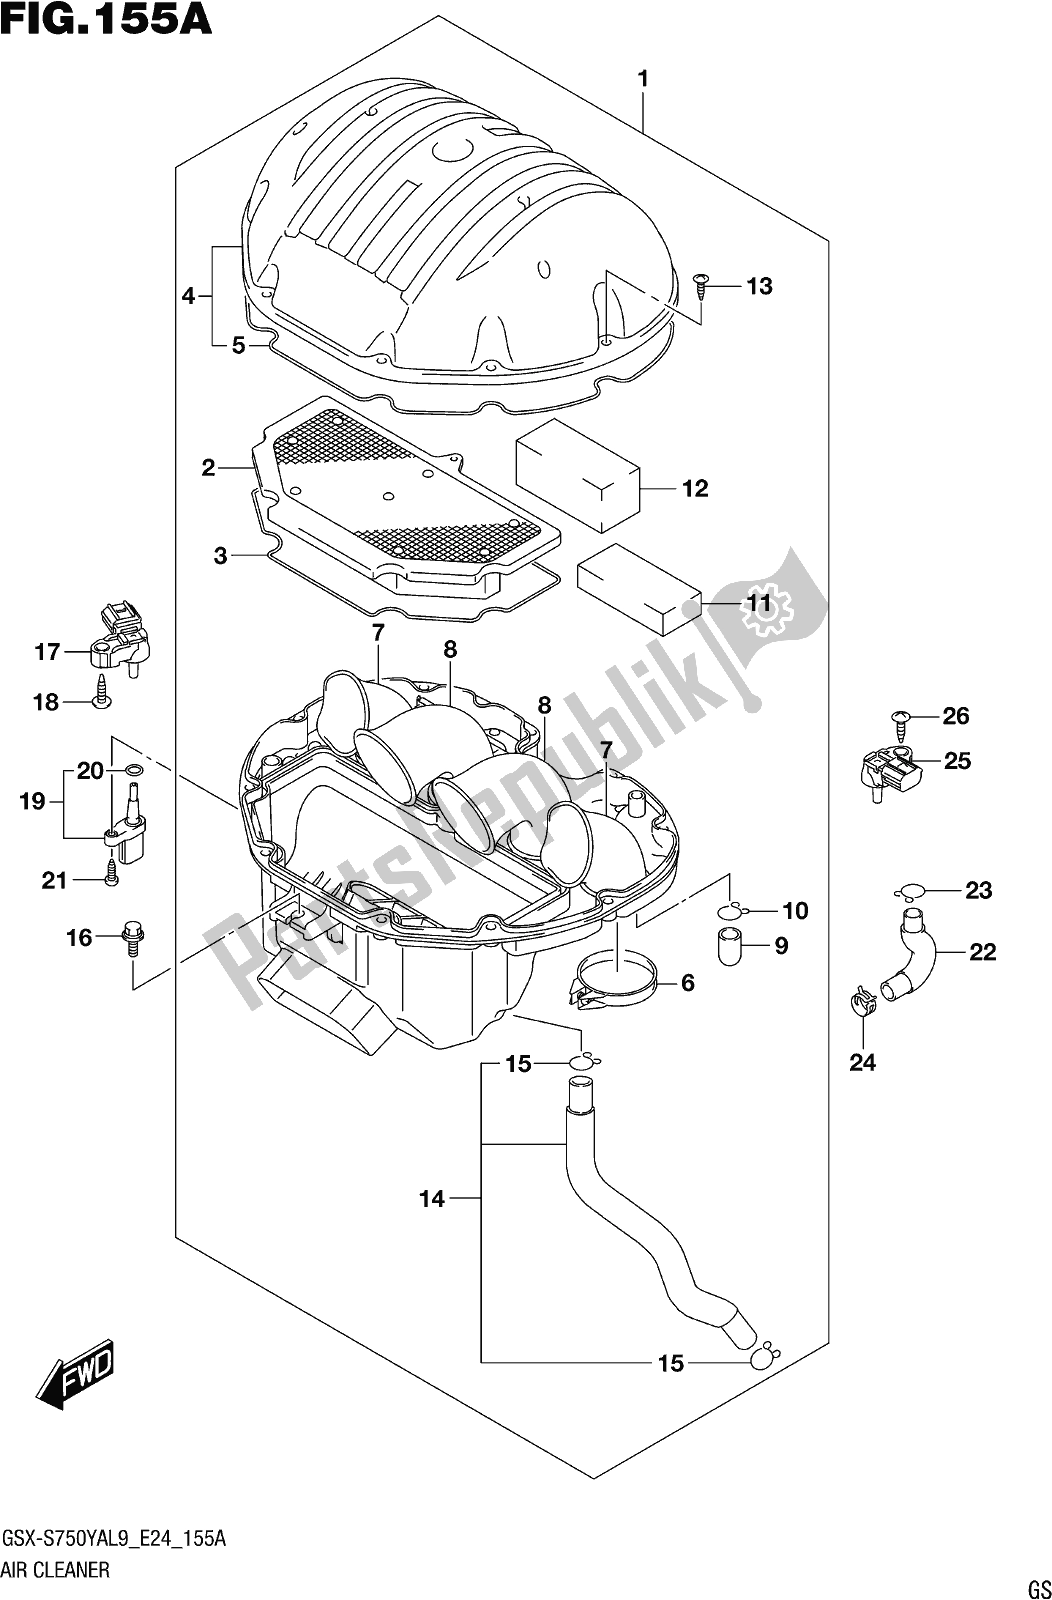 All parts for the Fig. 155a Air Cleaner of the Suzuki Gsx-s 750 ZA 2019